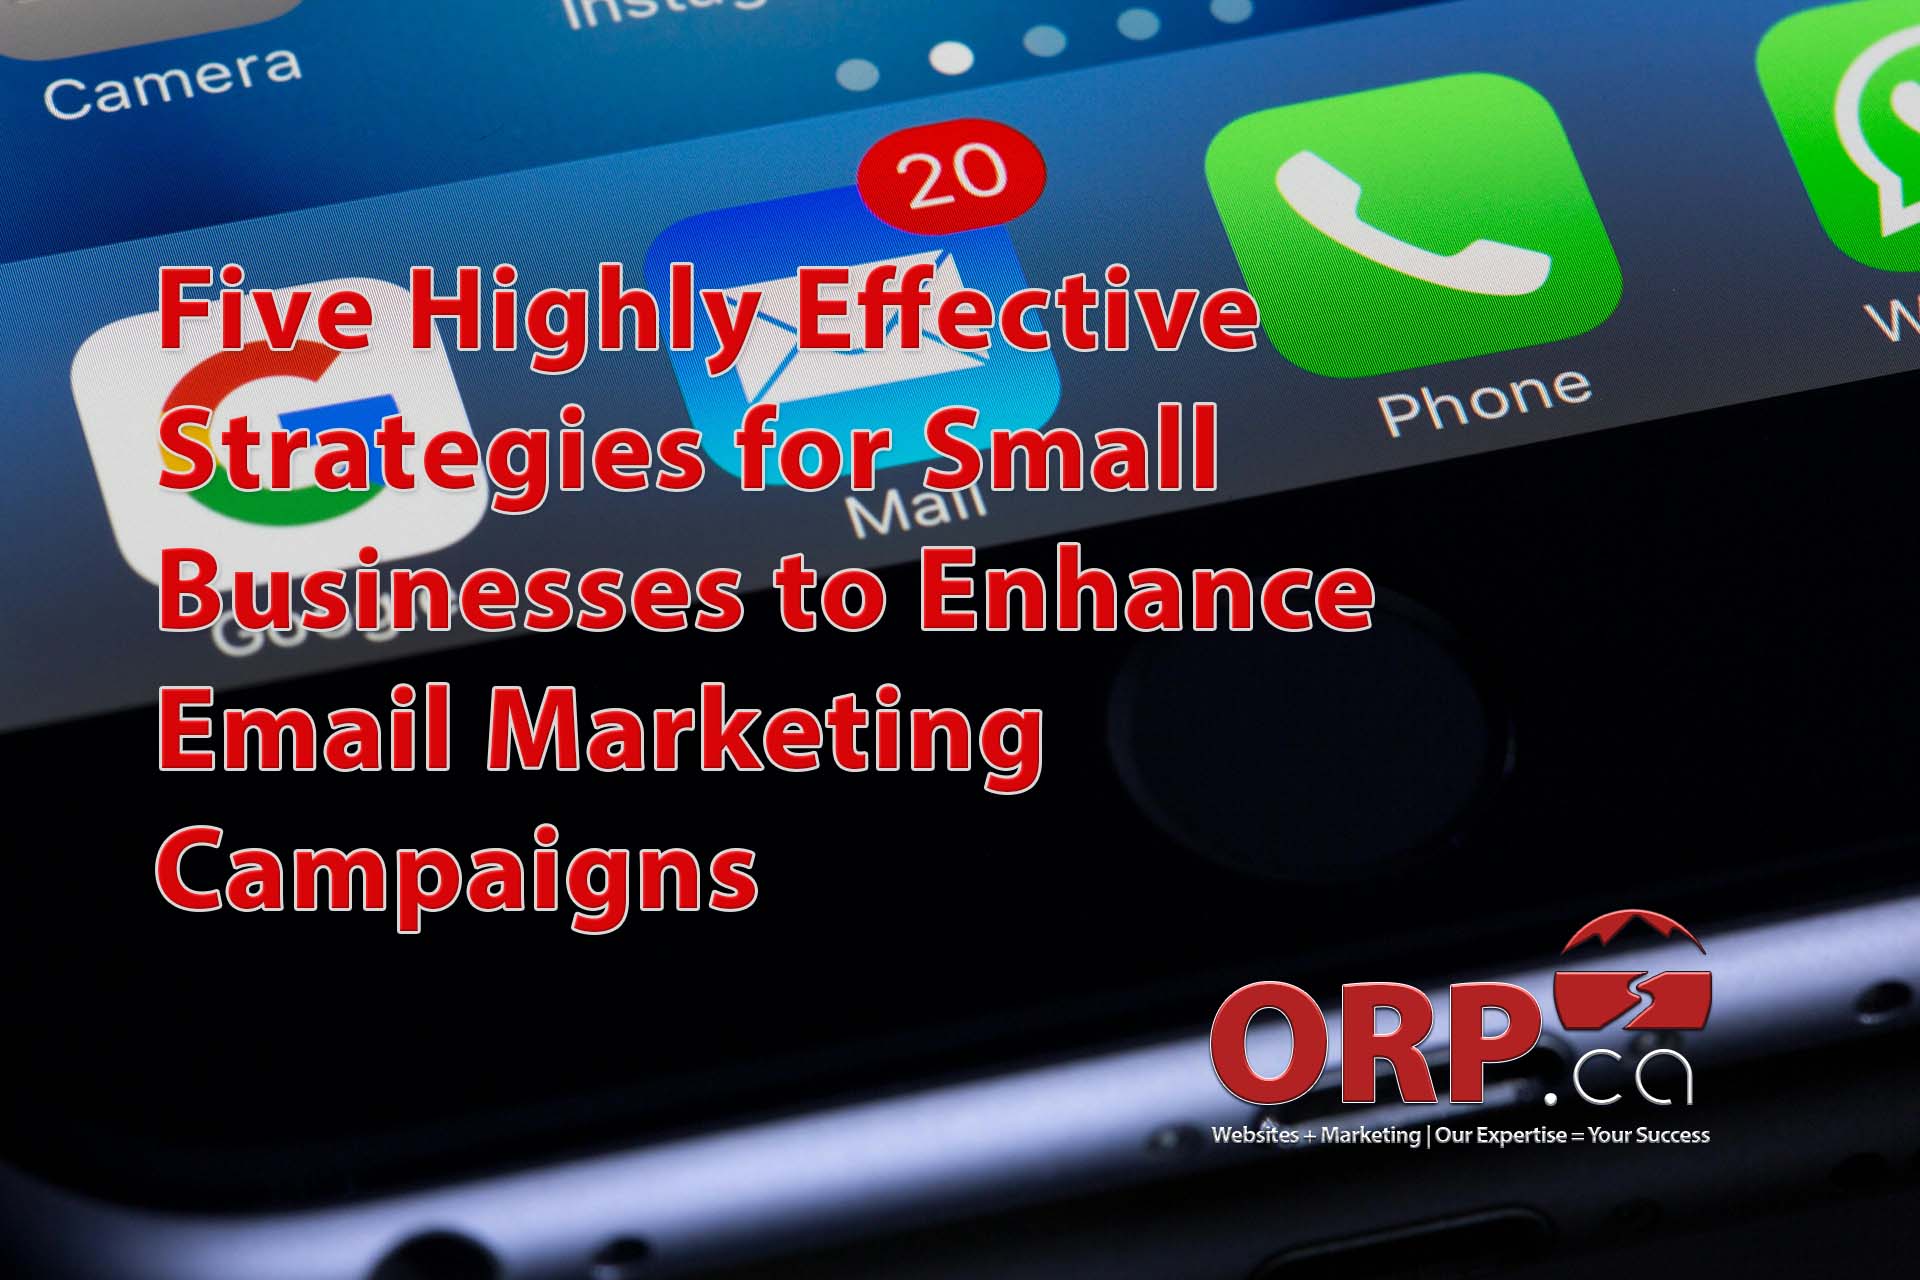 Five Highly Effective Strategies for Small Businesses to Enhance Email Marketing Campaigns a small business email and digital marketing article by ORP.ca, Your Small Business Website and Digital Marketing Services Provider